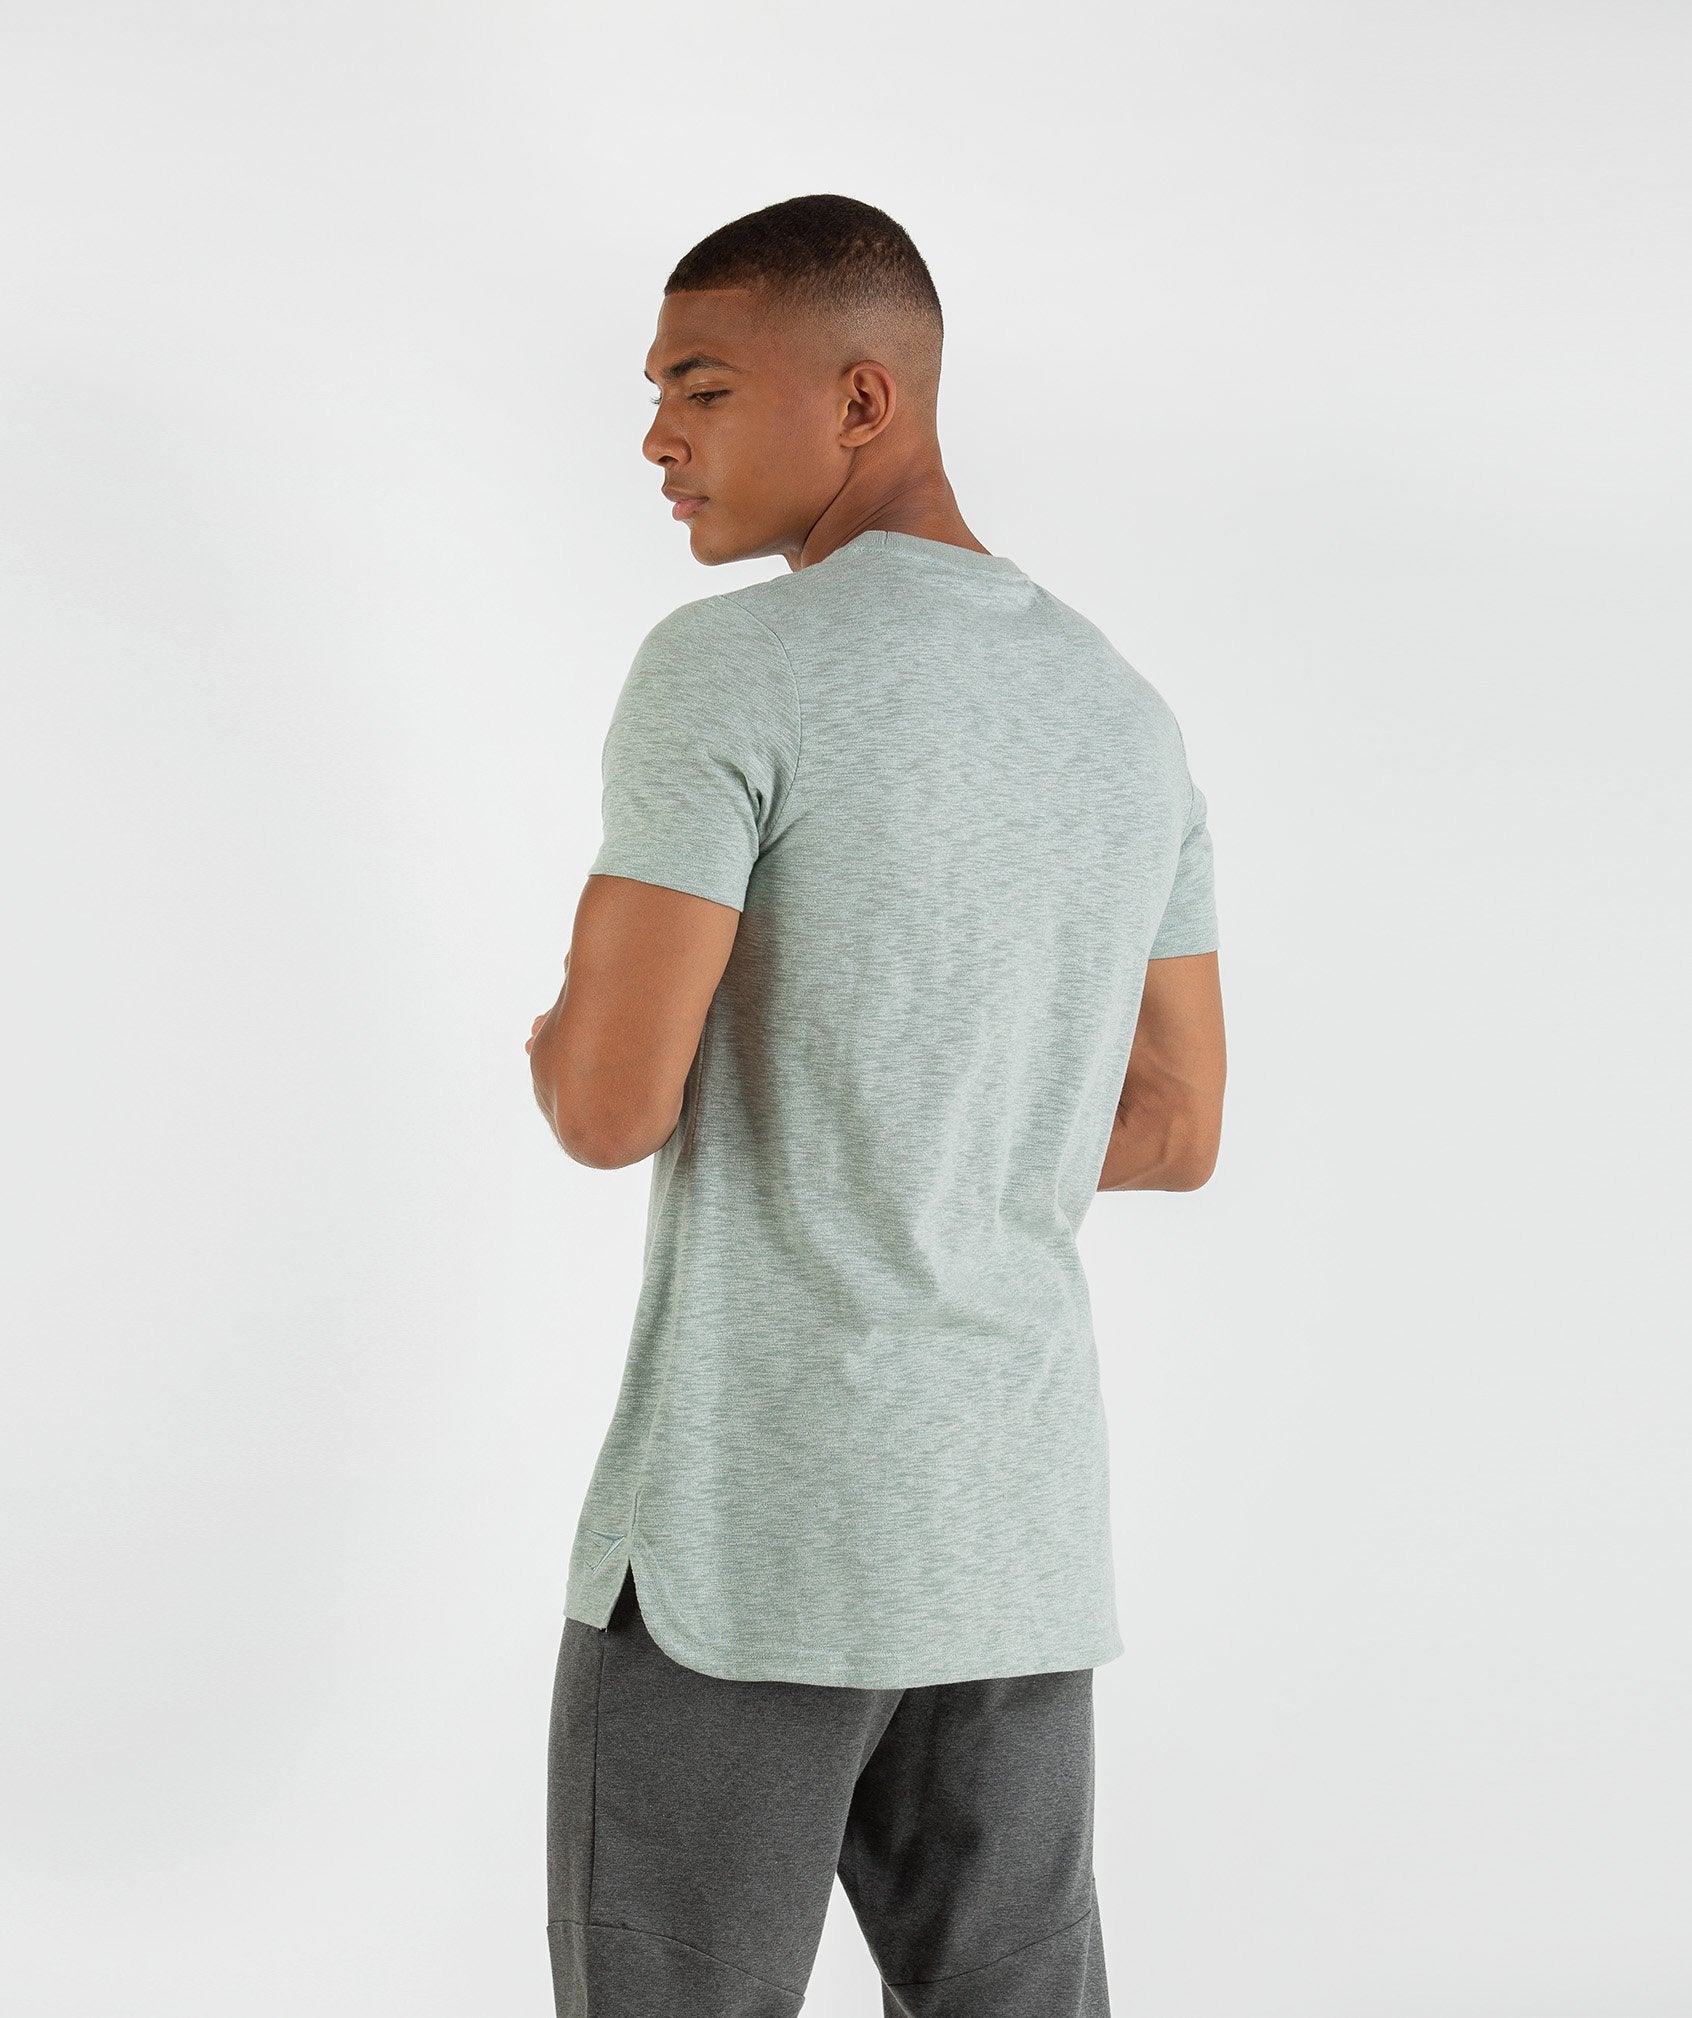 Heather T-Shirt in Autumn Green Marl - view 2